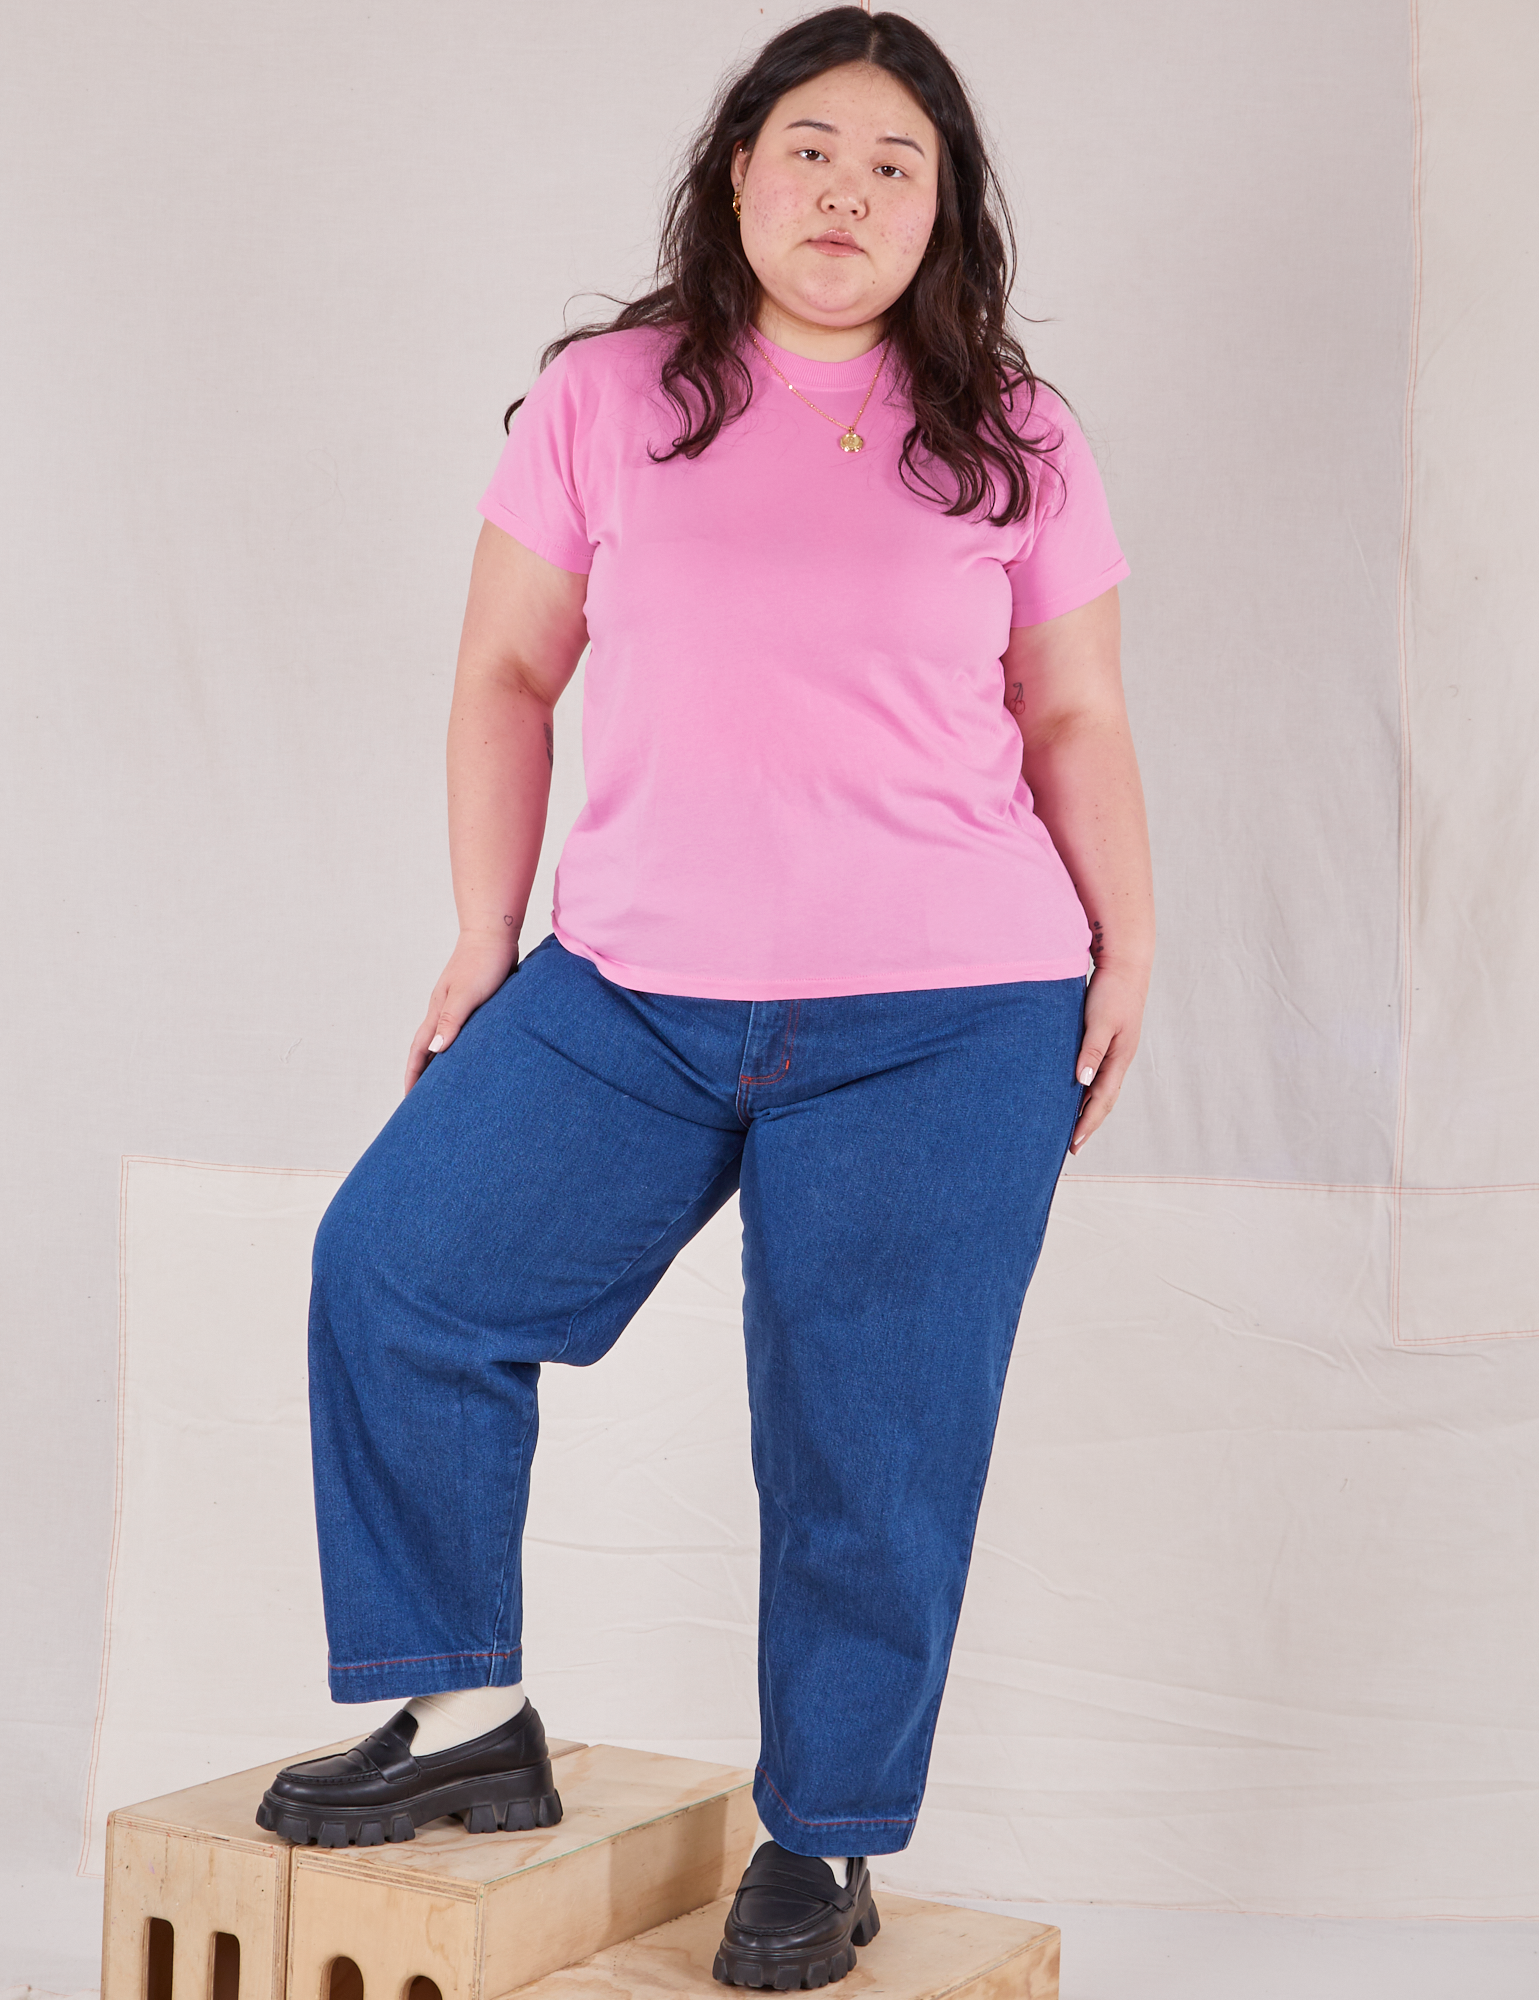 Ashley is 5&#39;7&quot; and wearing L Organic Vintage Tee in Bubblegum Pink paired with dark wash Trouser Jeans